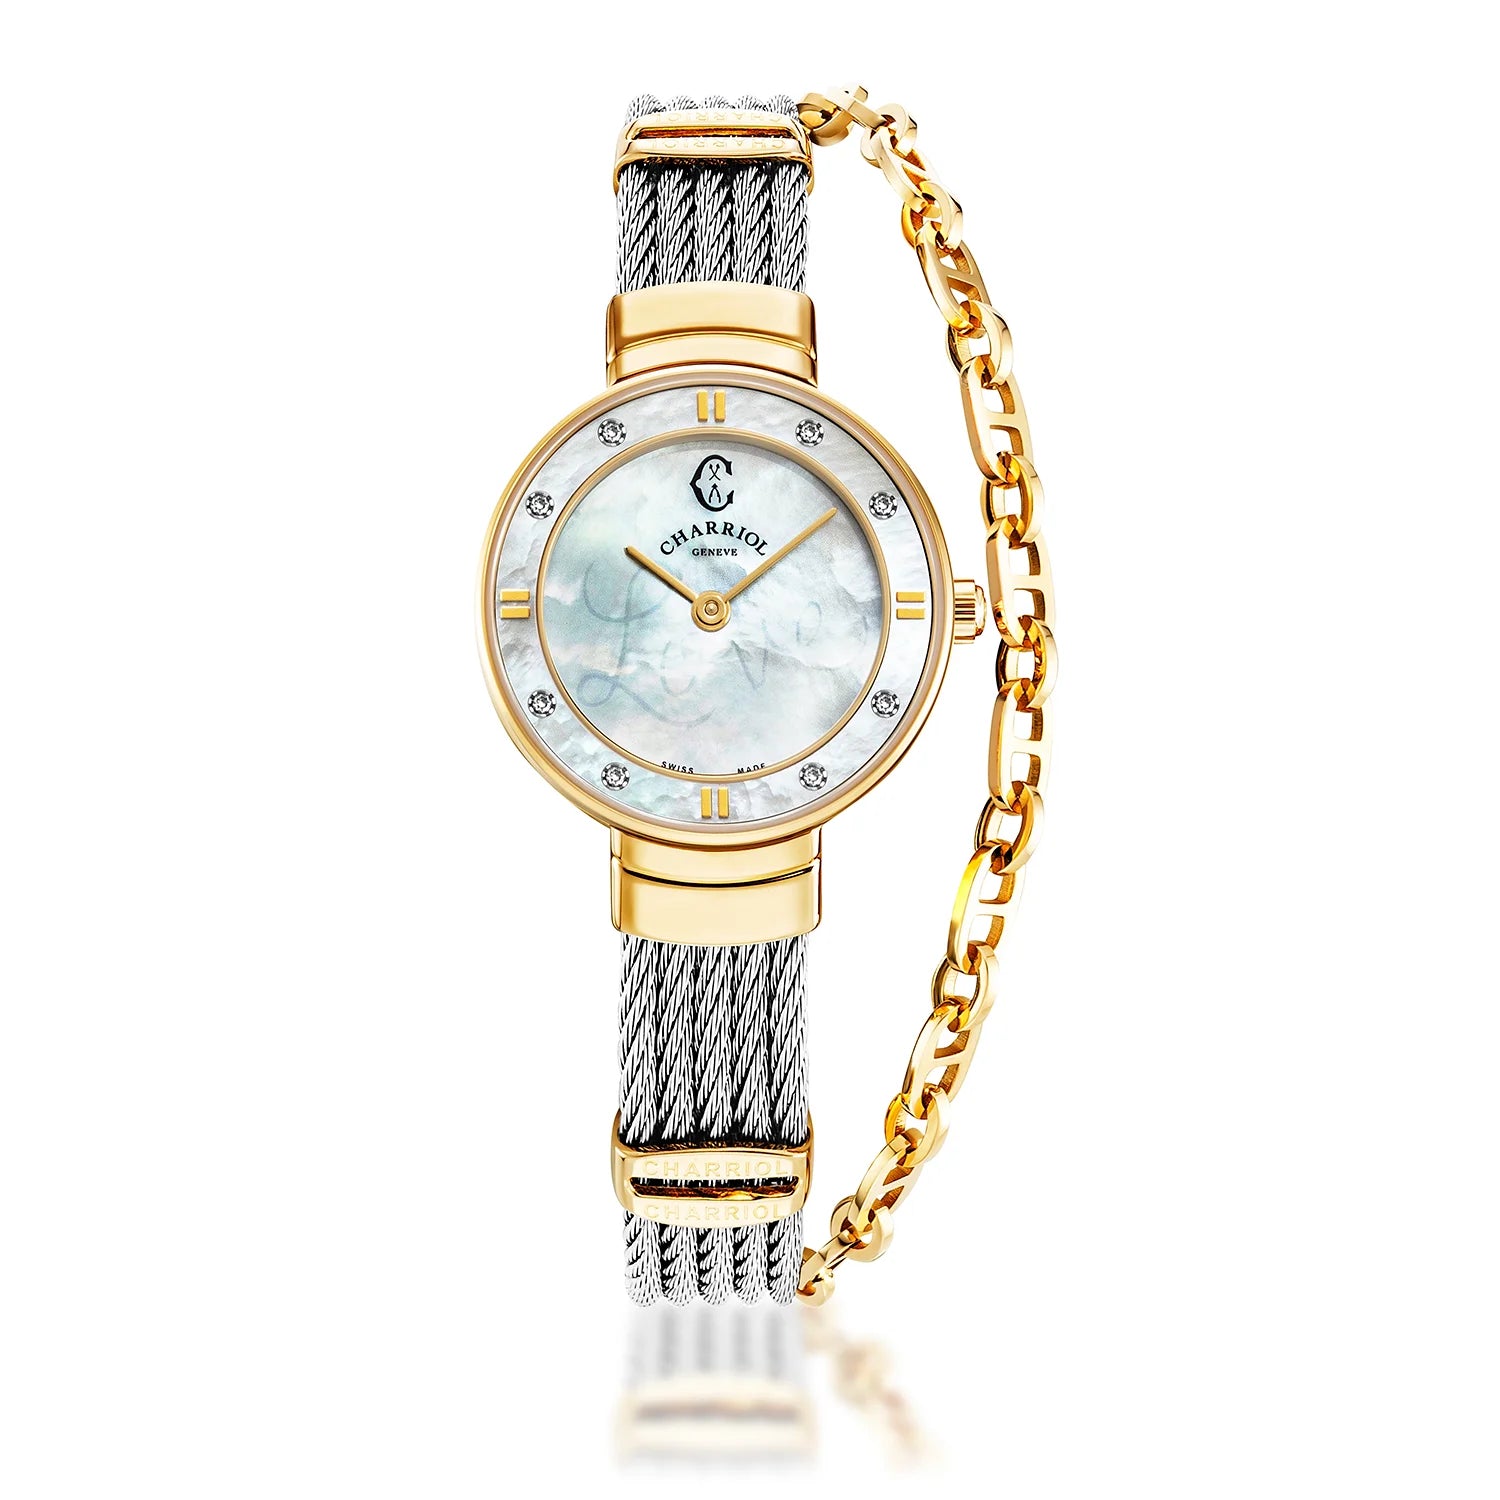 ST TROPEZ, 25MM, QUARTZ CALIBRE, WHITE MOTHER-OF-PEARL WITH LUMINESCENT "LOVE" DIAL, WHITE MOTHER-OF-PEARL WITH 8 DIAMONDS BEZEL, STEEL CABLE BRACELET - Charriol Geneve -  Watch